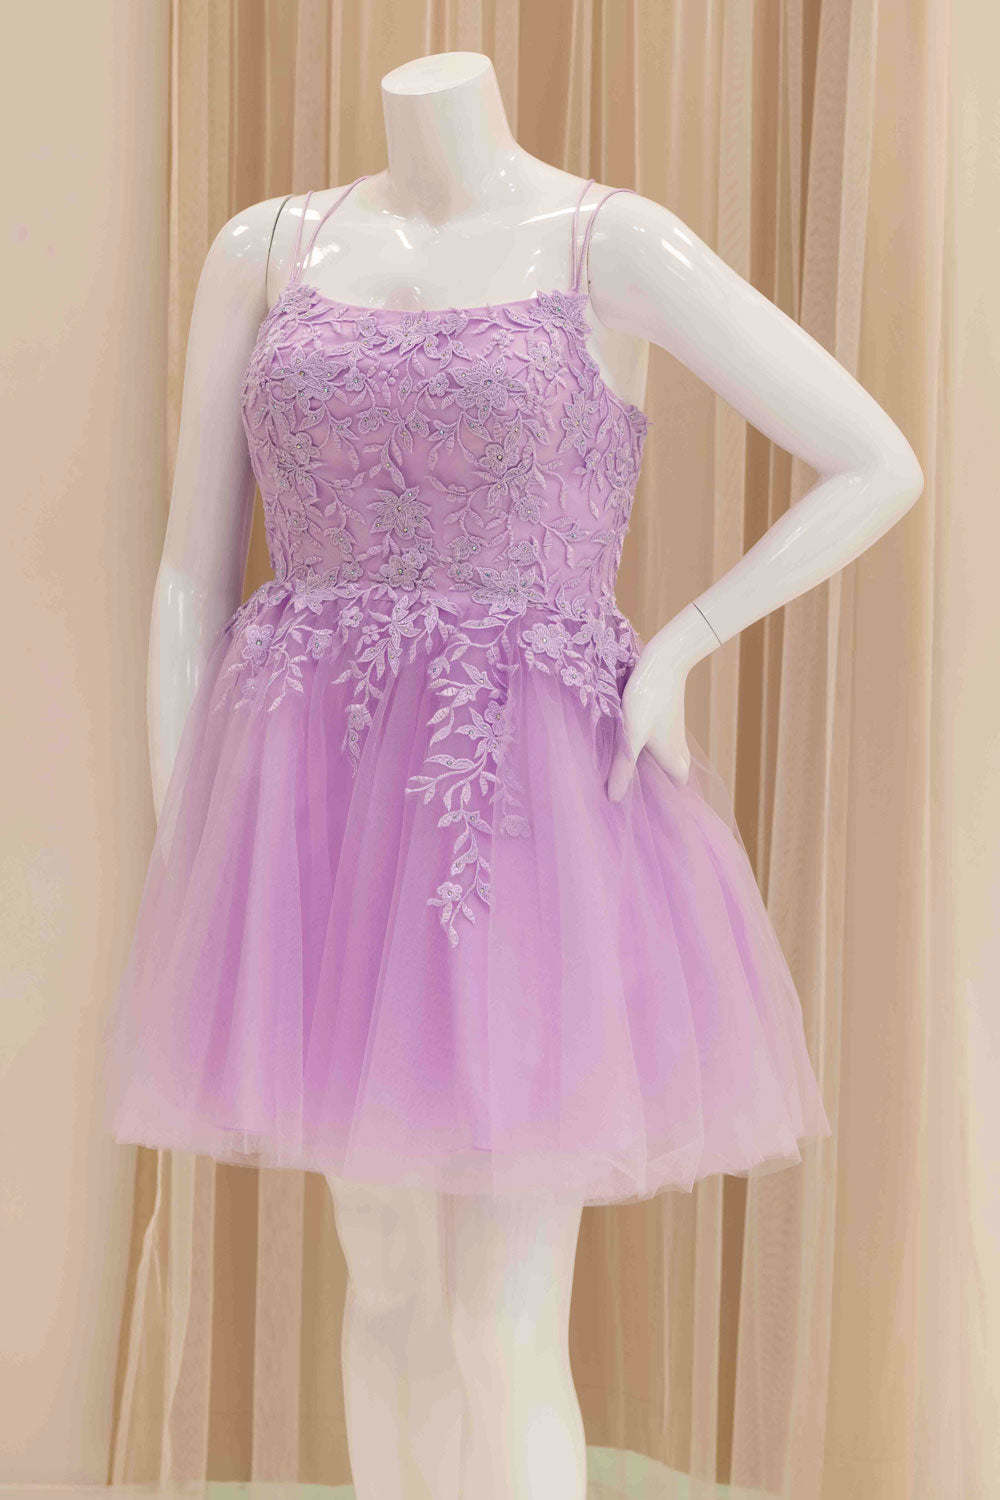 Leafy Vine Embroidered Bodice Tie Back Tulle Skirt Party Dress in Lavender